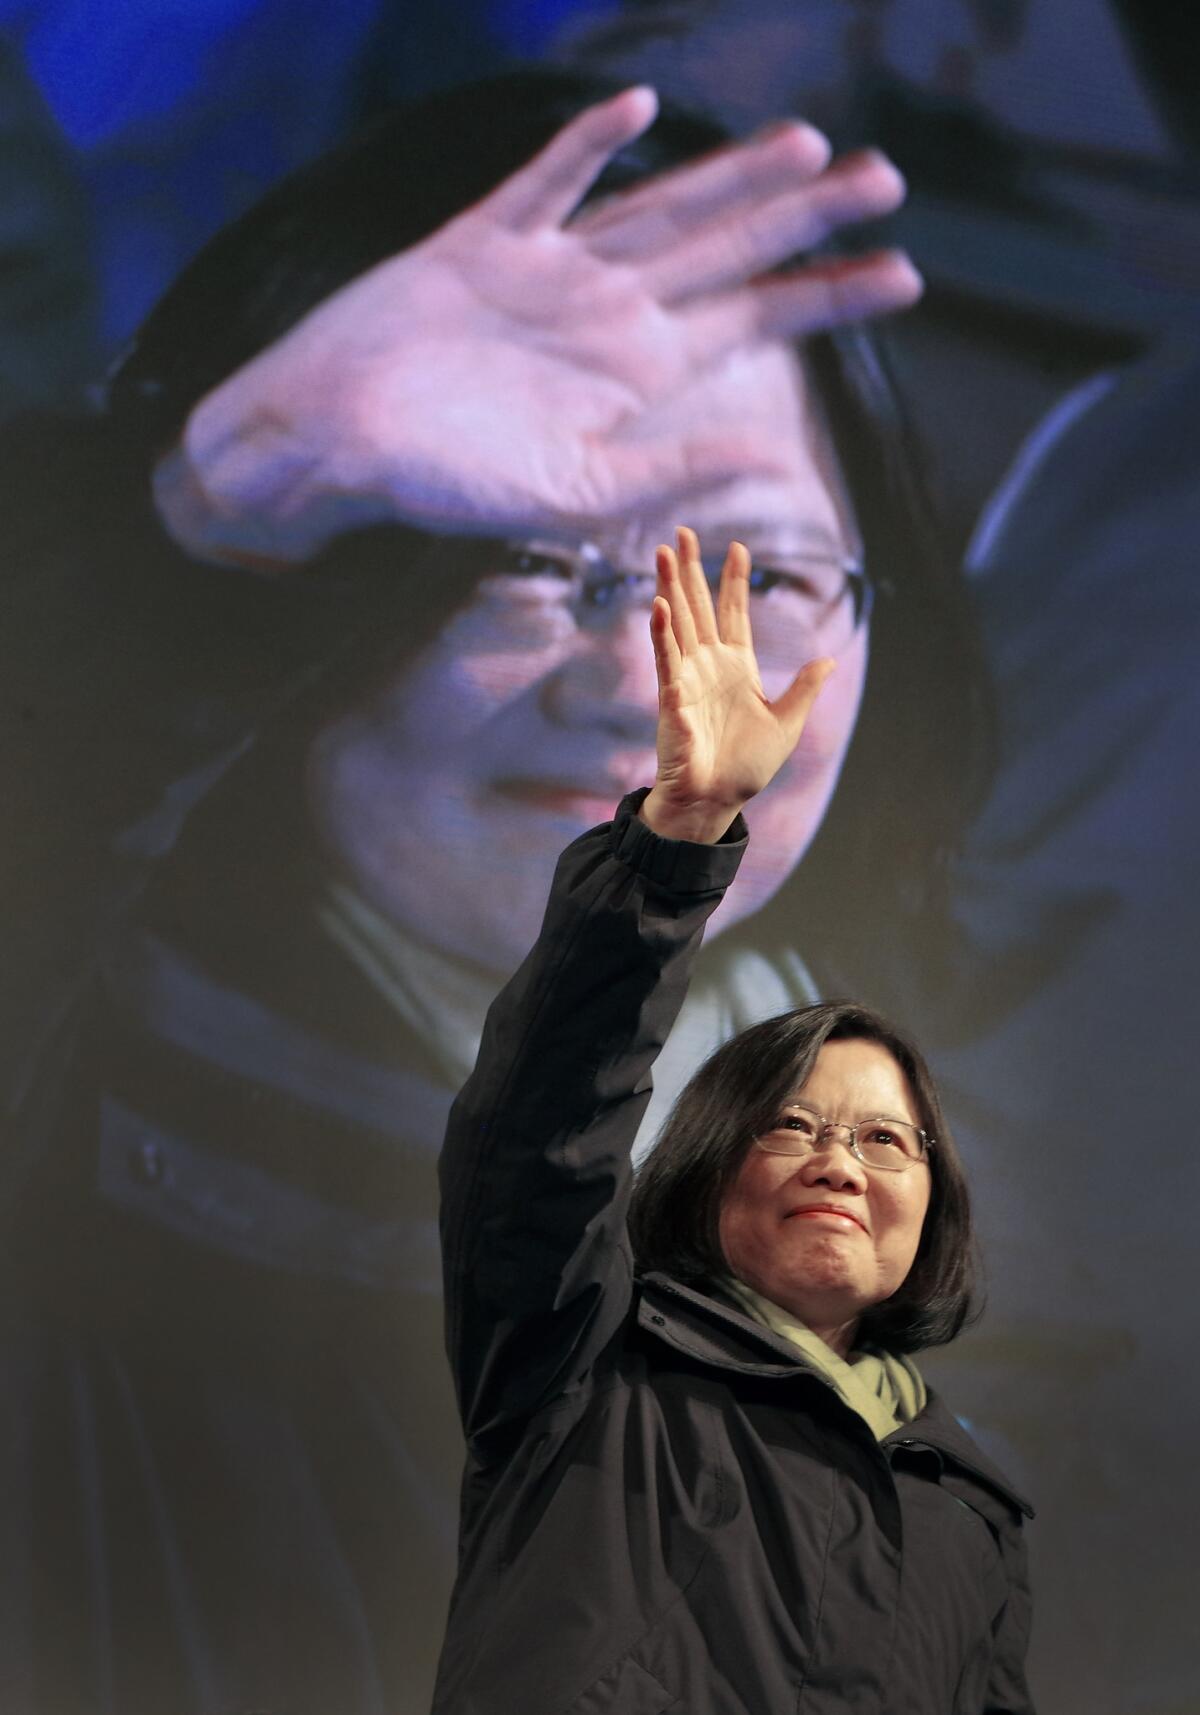 Tsai Ing-wen raises her hands as she declares victory in Taiwan's presidential election Jan. 16, 2016, in Taipei.